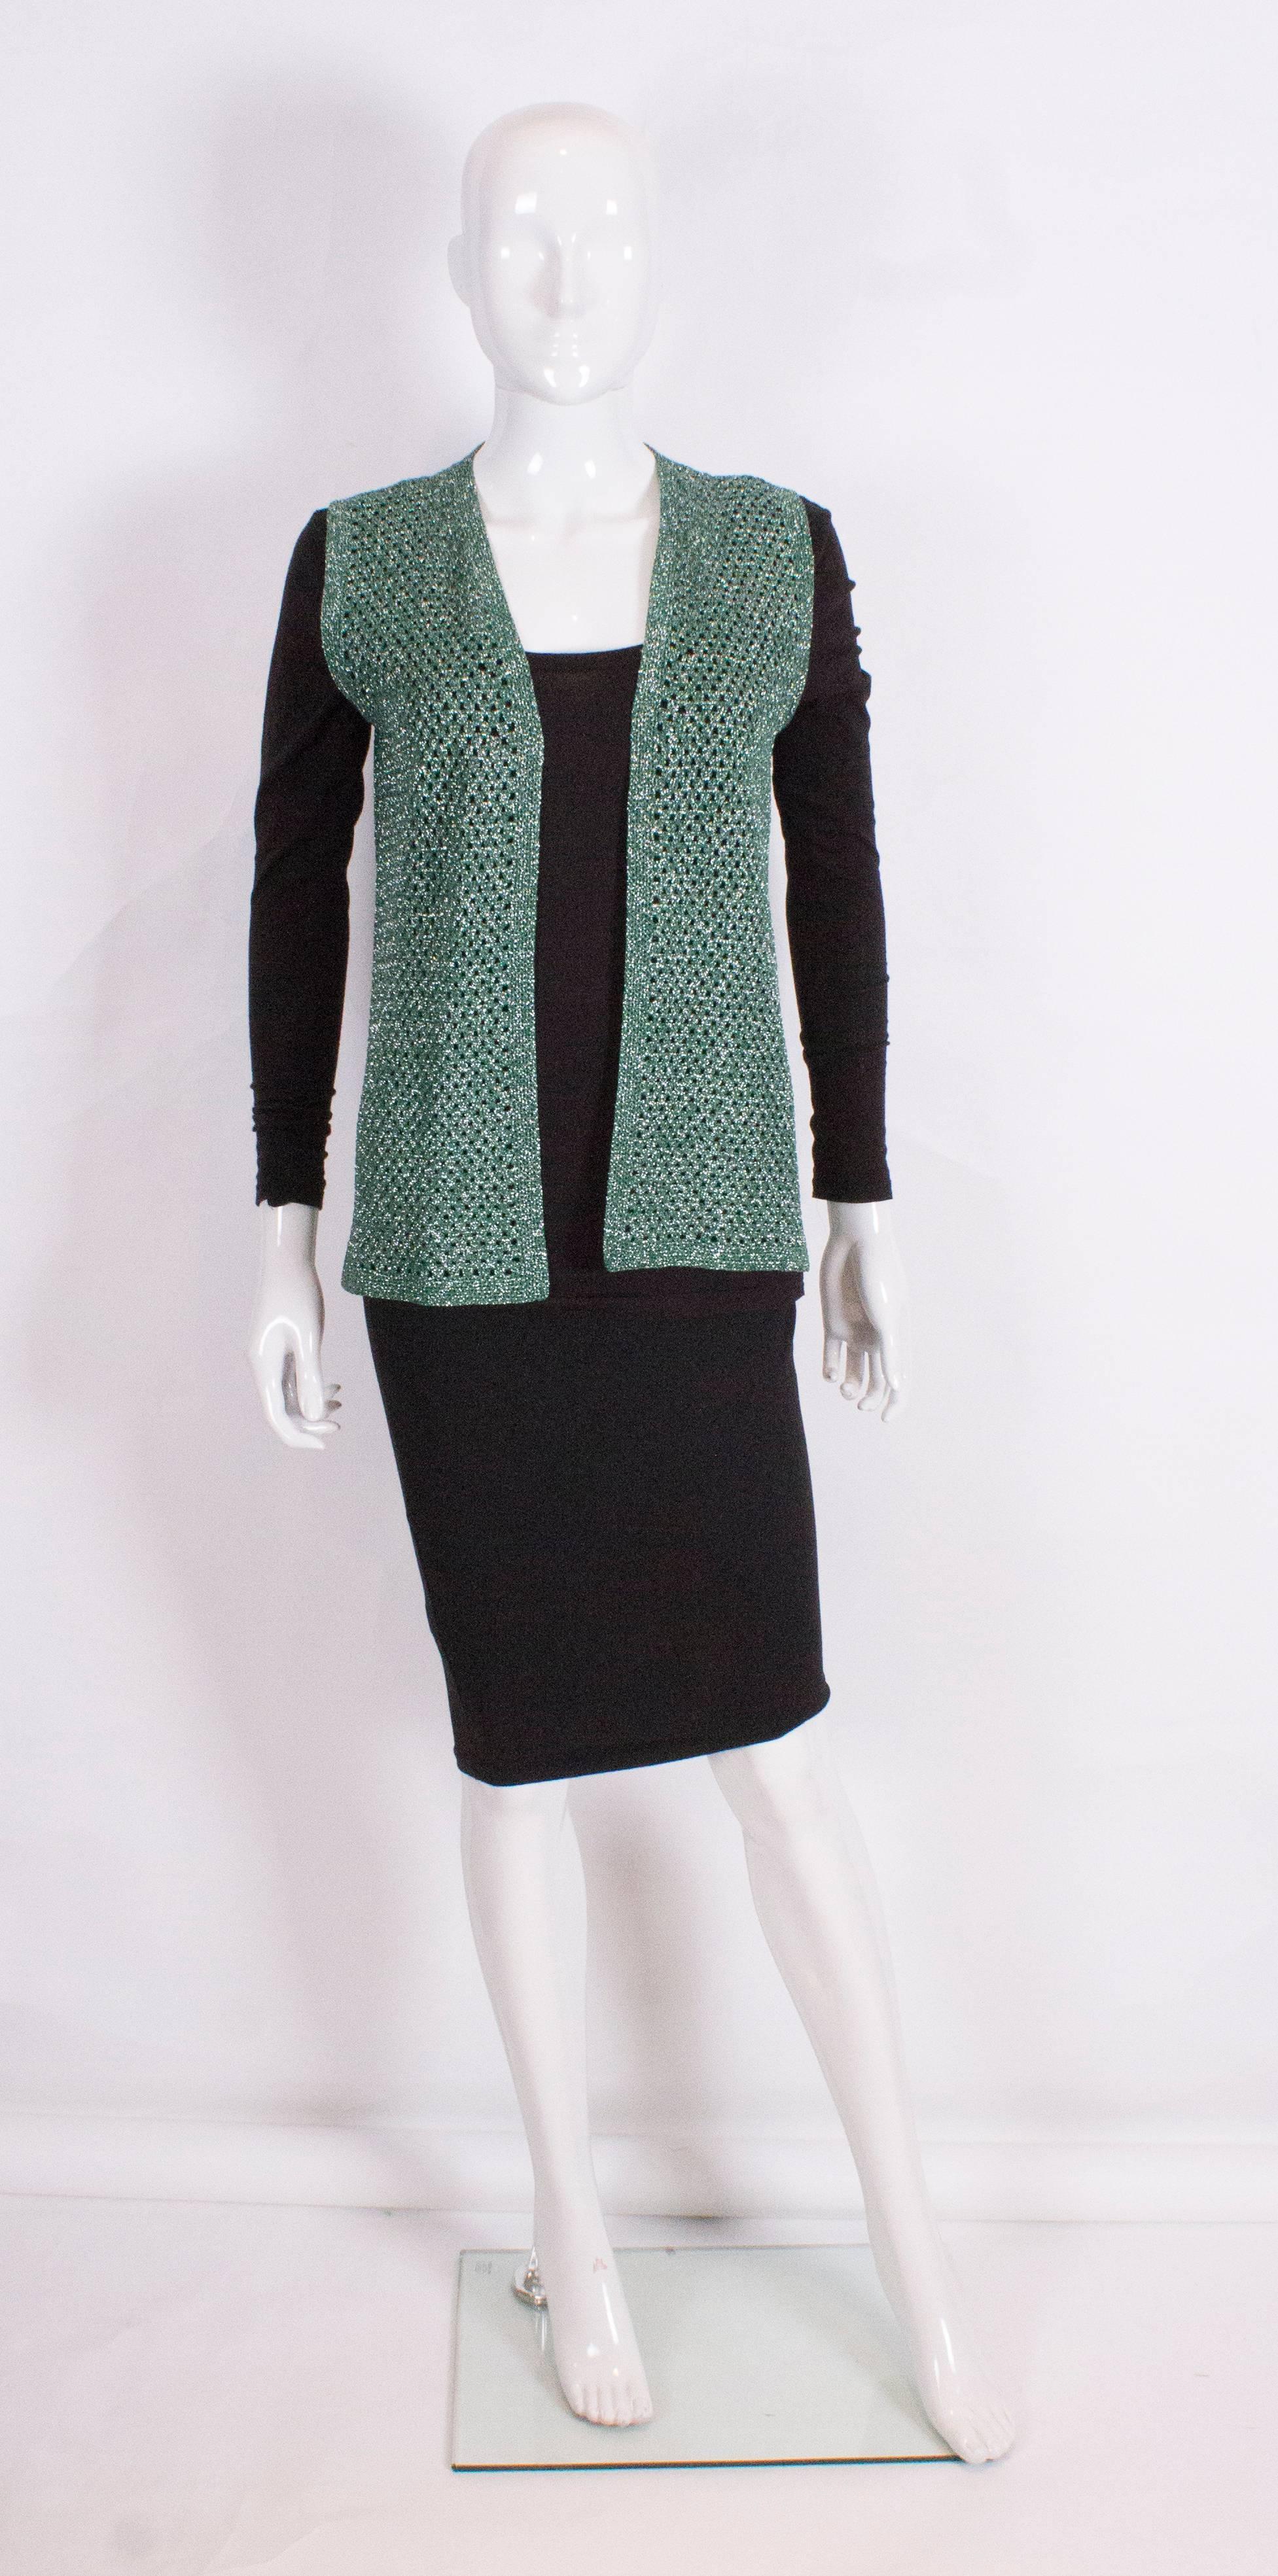 An easy to wear vintage silver and green sleevless crochet gilet. Ideal for brightening up Fall and Winter wear.